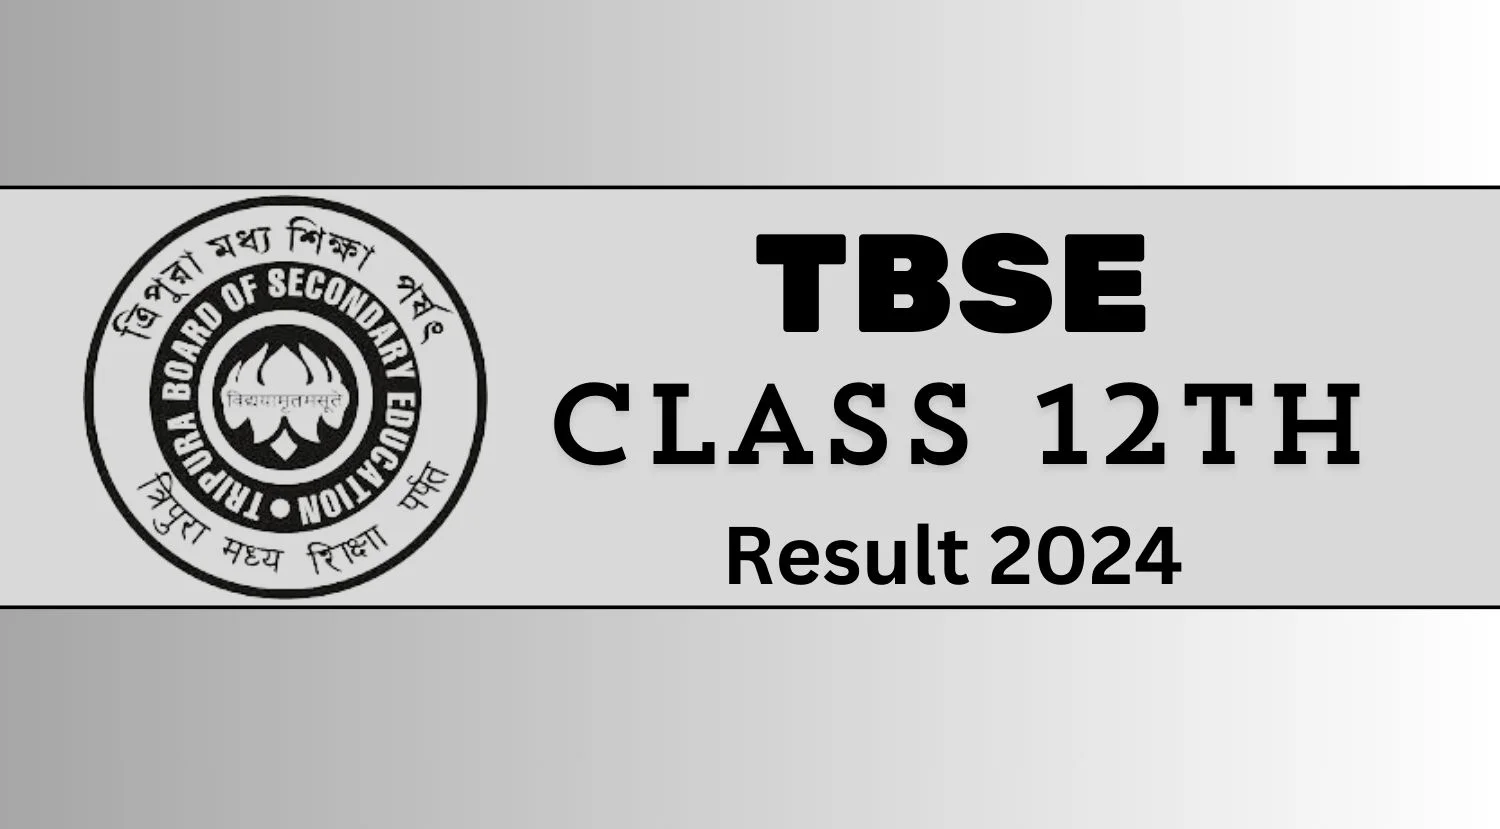 TBSE Class 12th Result 2024